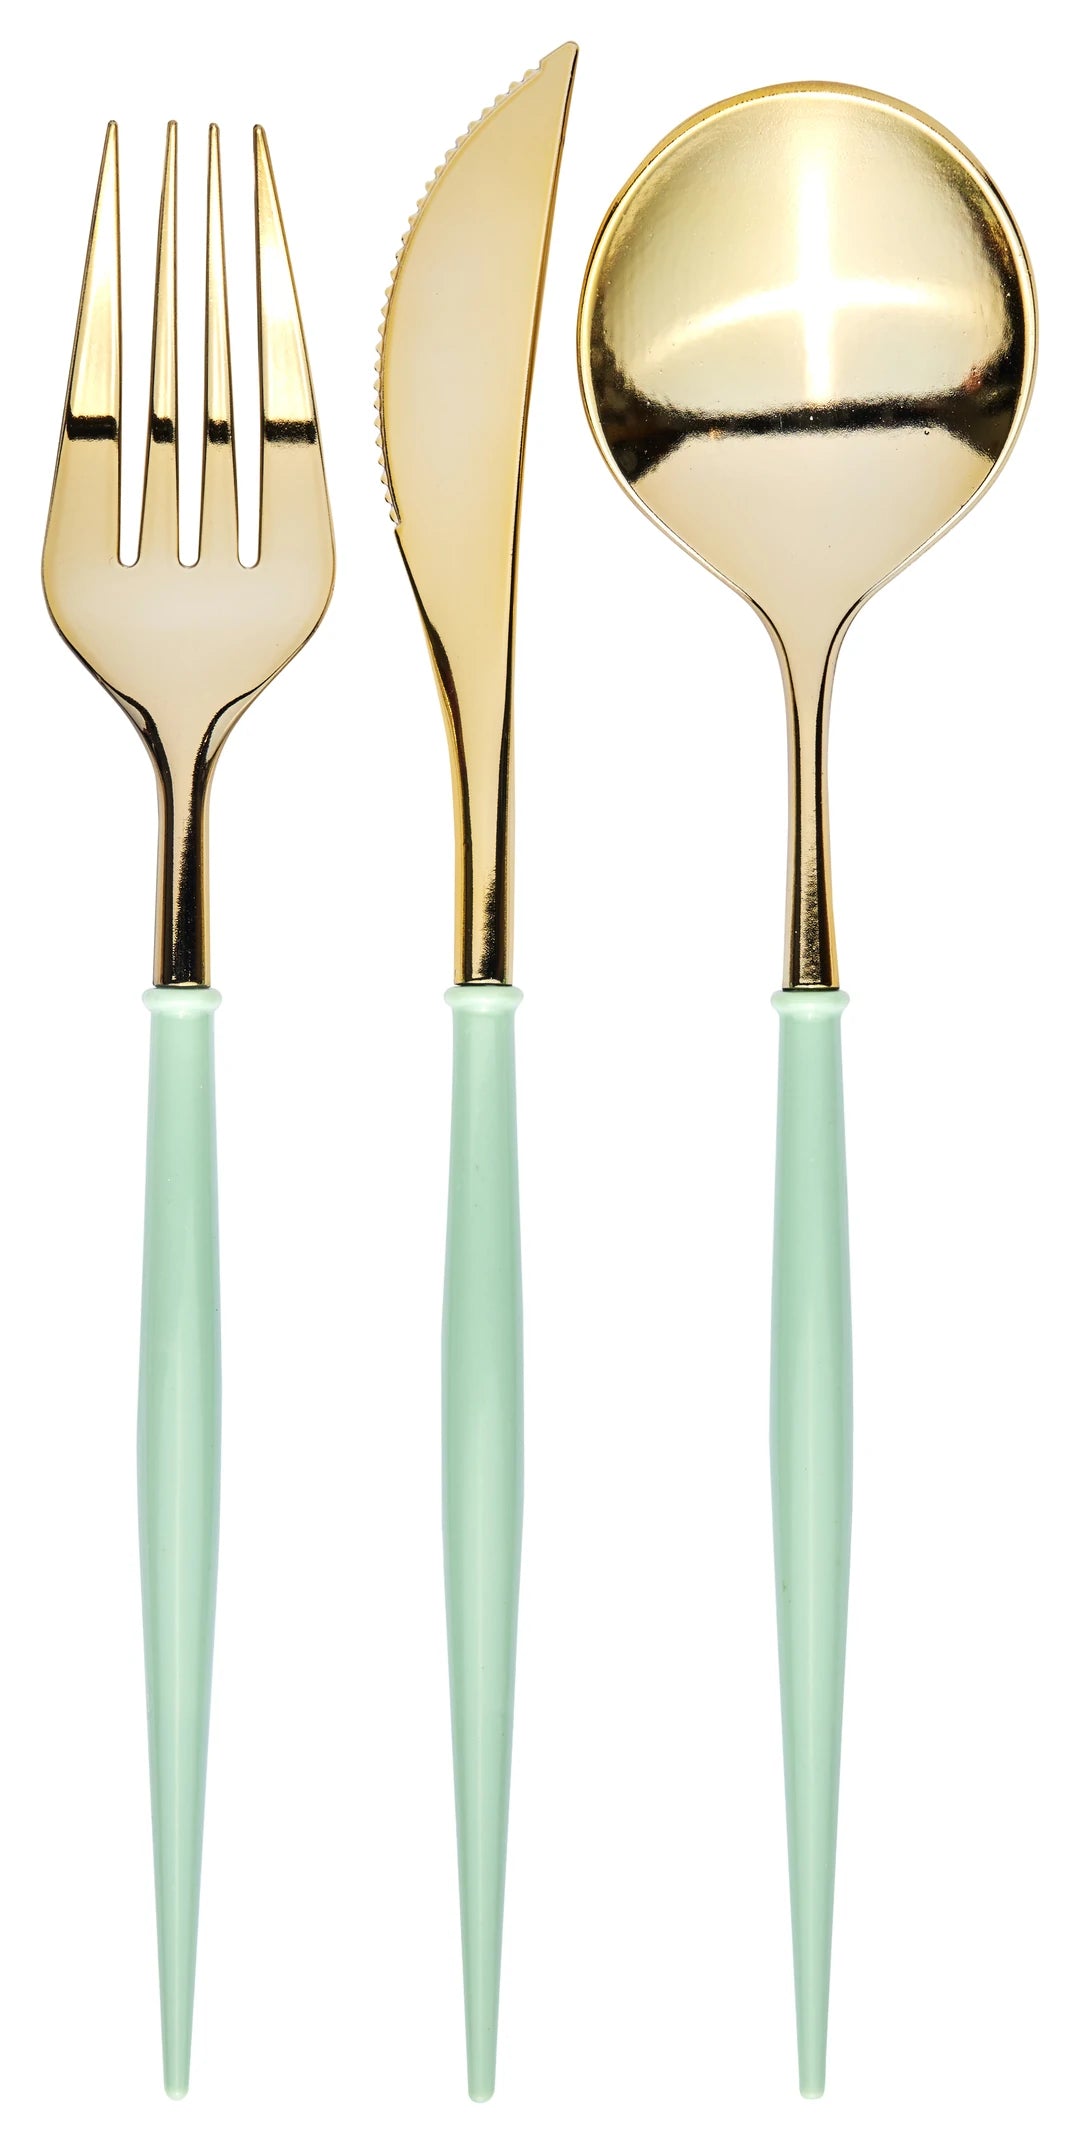 Bella Cutlery Gold/Mint Handle, 8 place settings